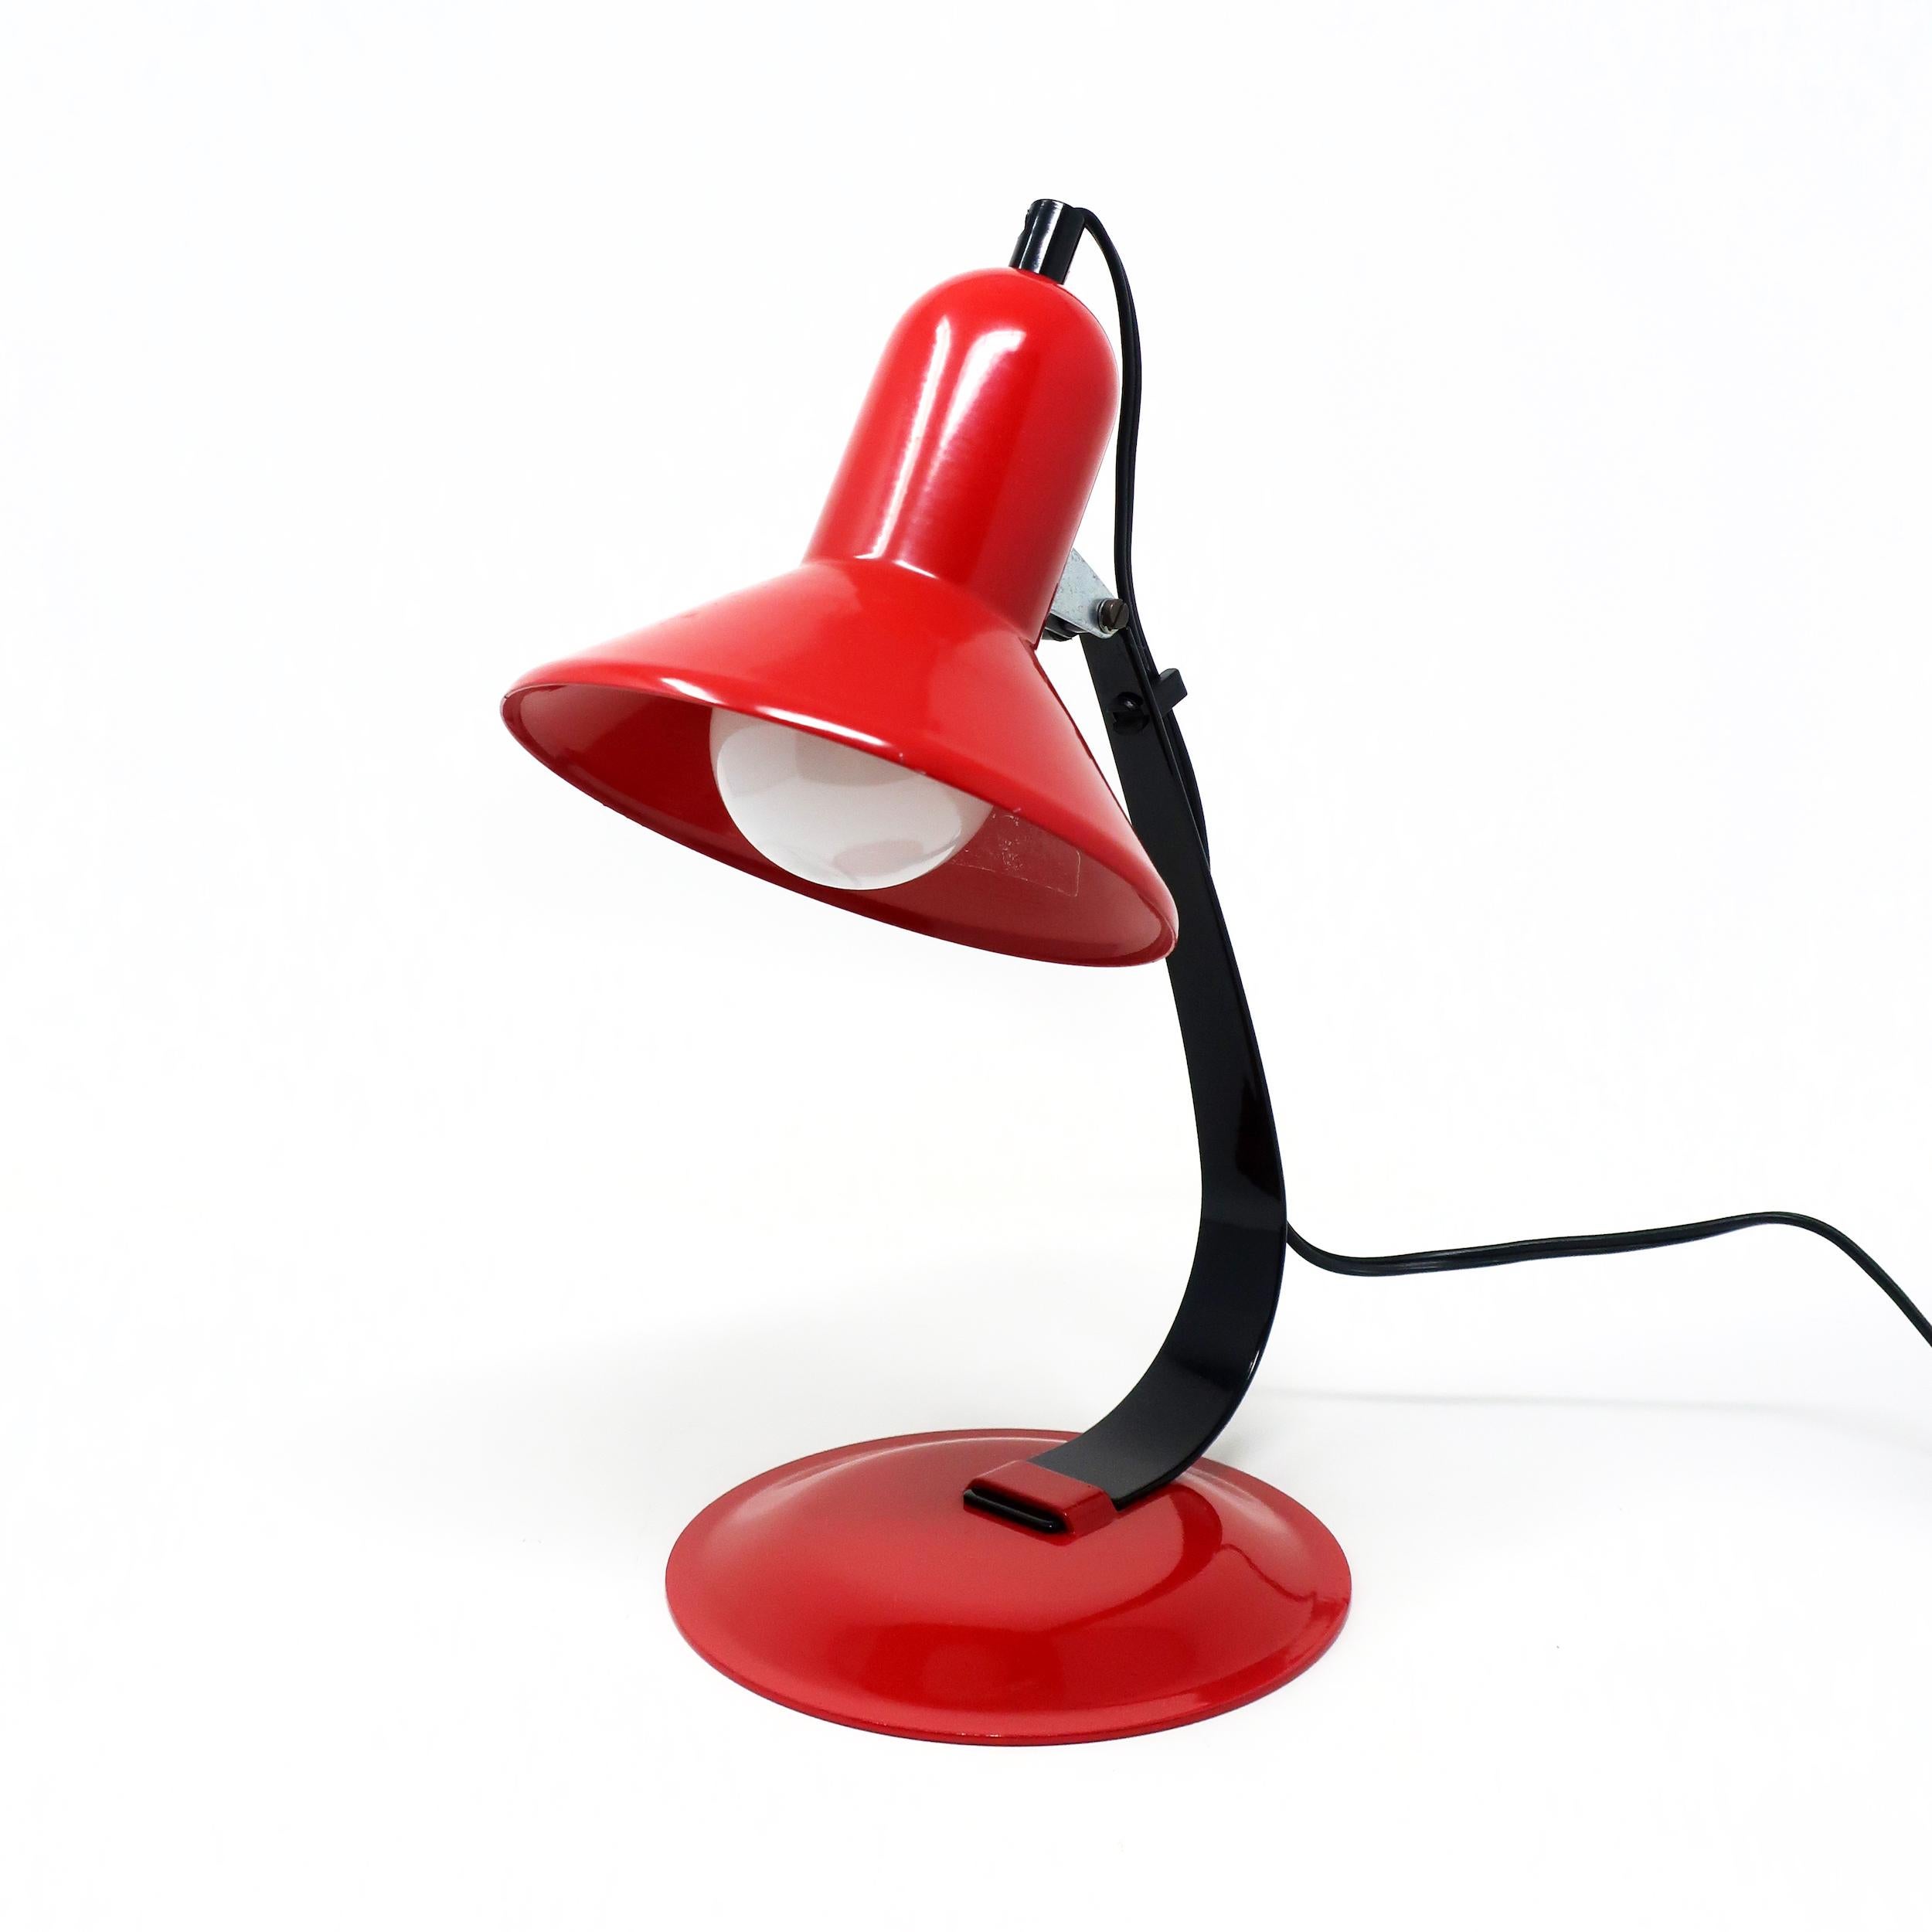 Perfectly straddling the line between mid-century modernism and postmodernism, this desk lamp has red enameled metal base and shade, black metal stem, and a black cord with on/off switch and cord clip. It has beautiful lines and a sensuous